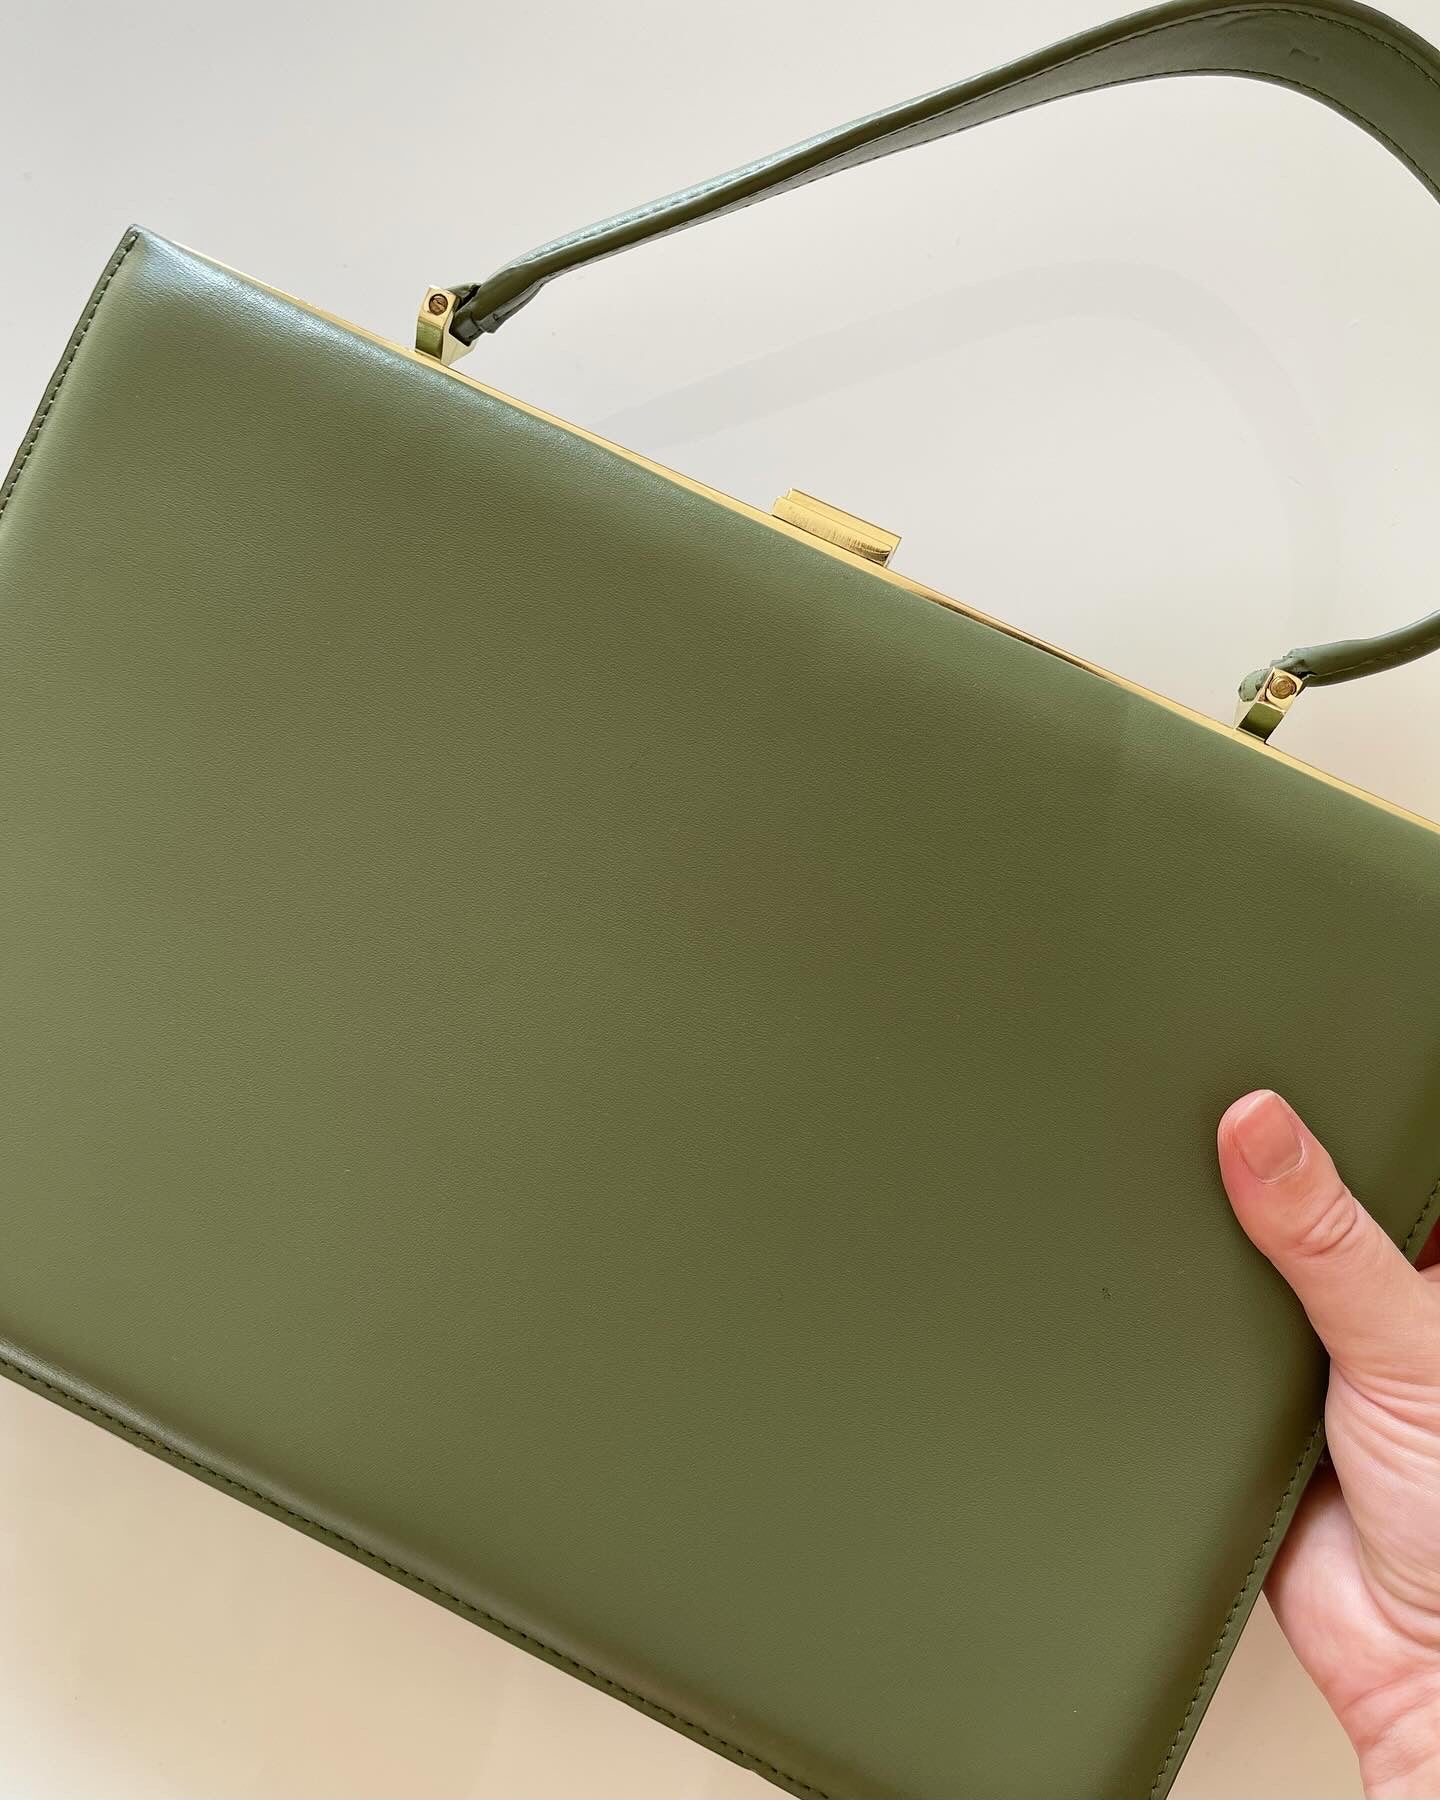 Gorgeous leather green bag (Celine inspired)